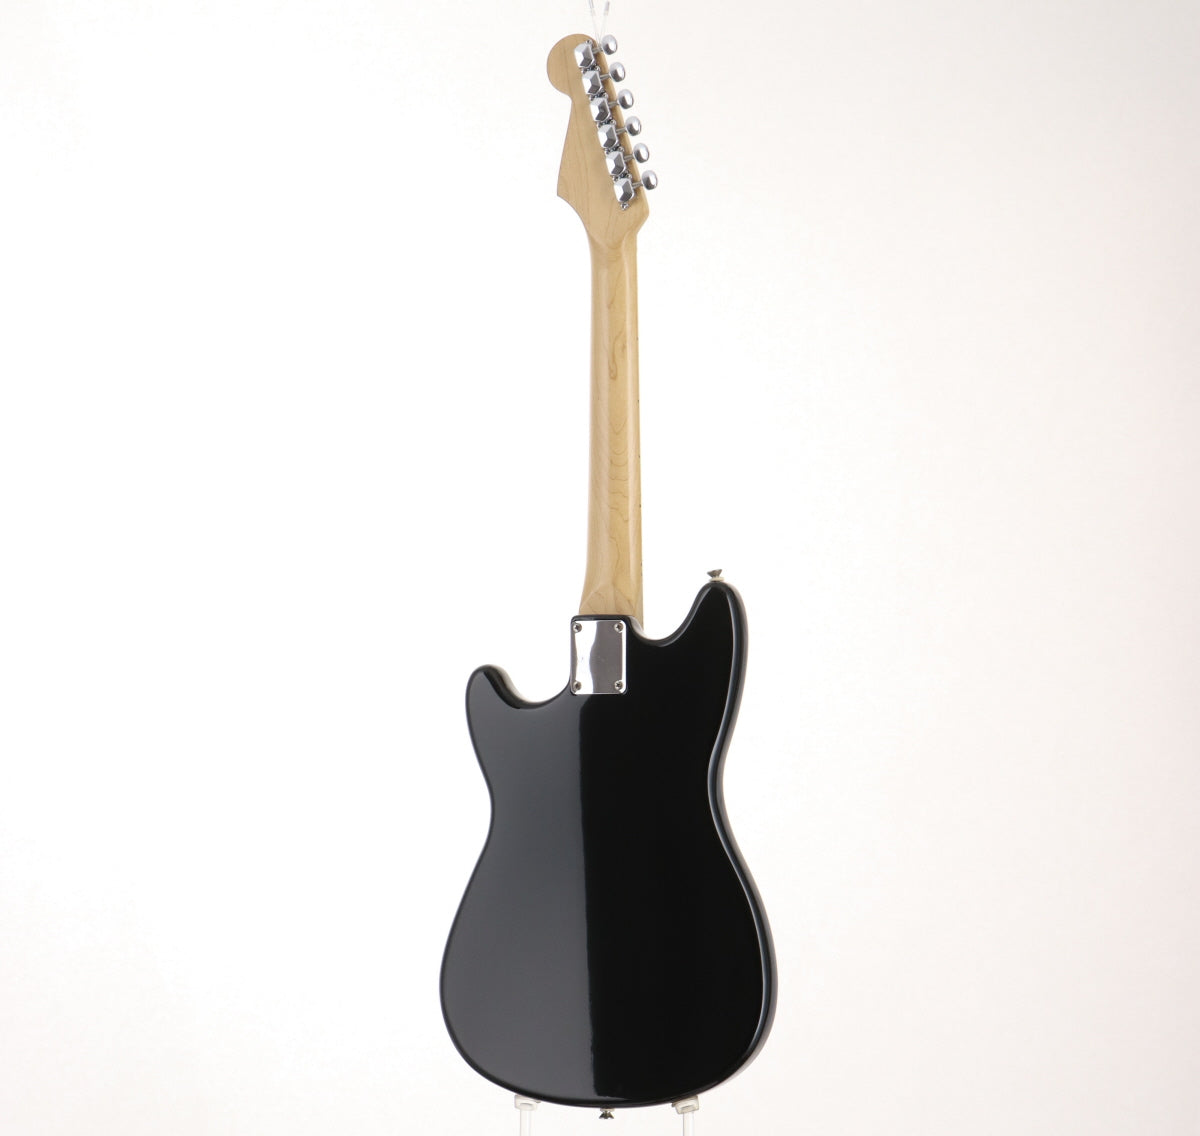 [SN MN513347] USED FENDER MEXICO / Duo Sonic Black [05]